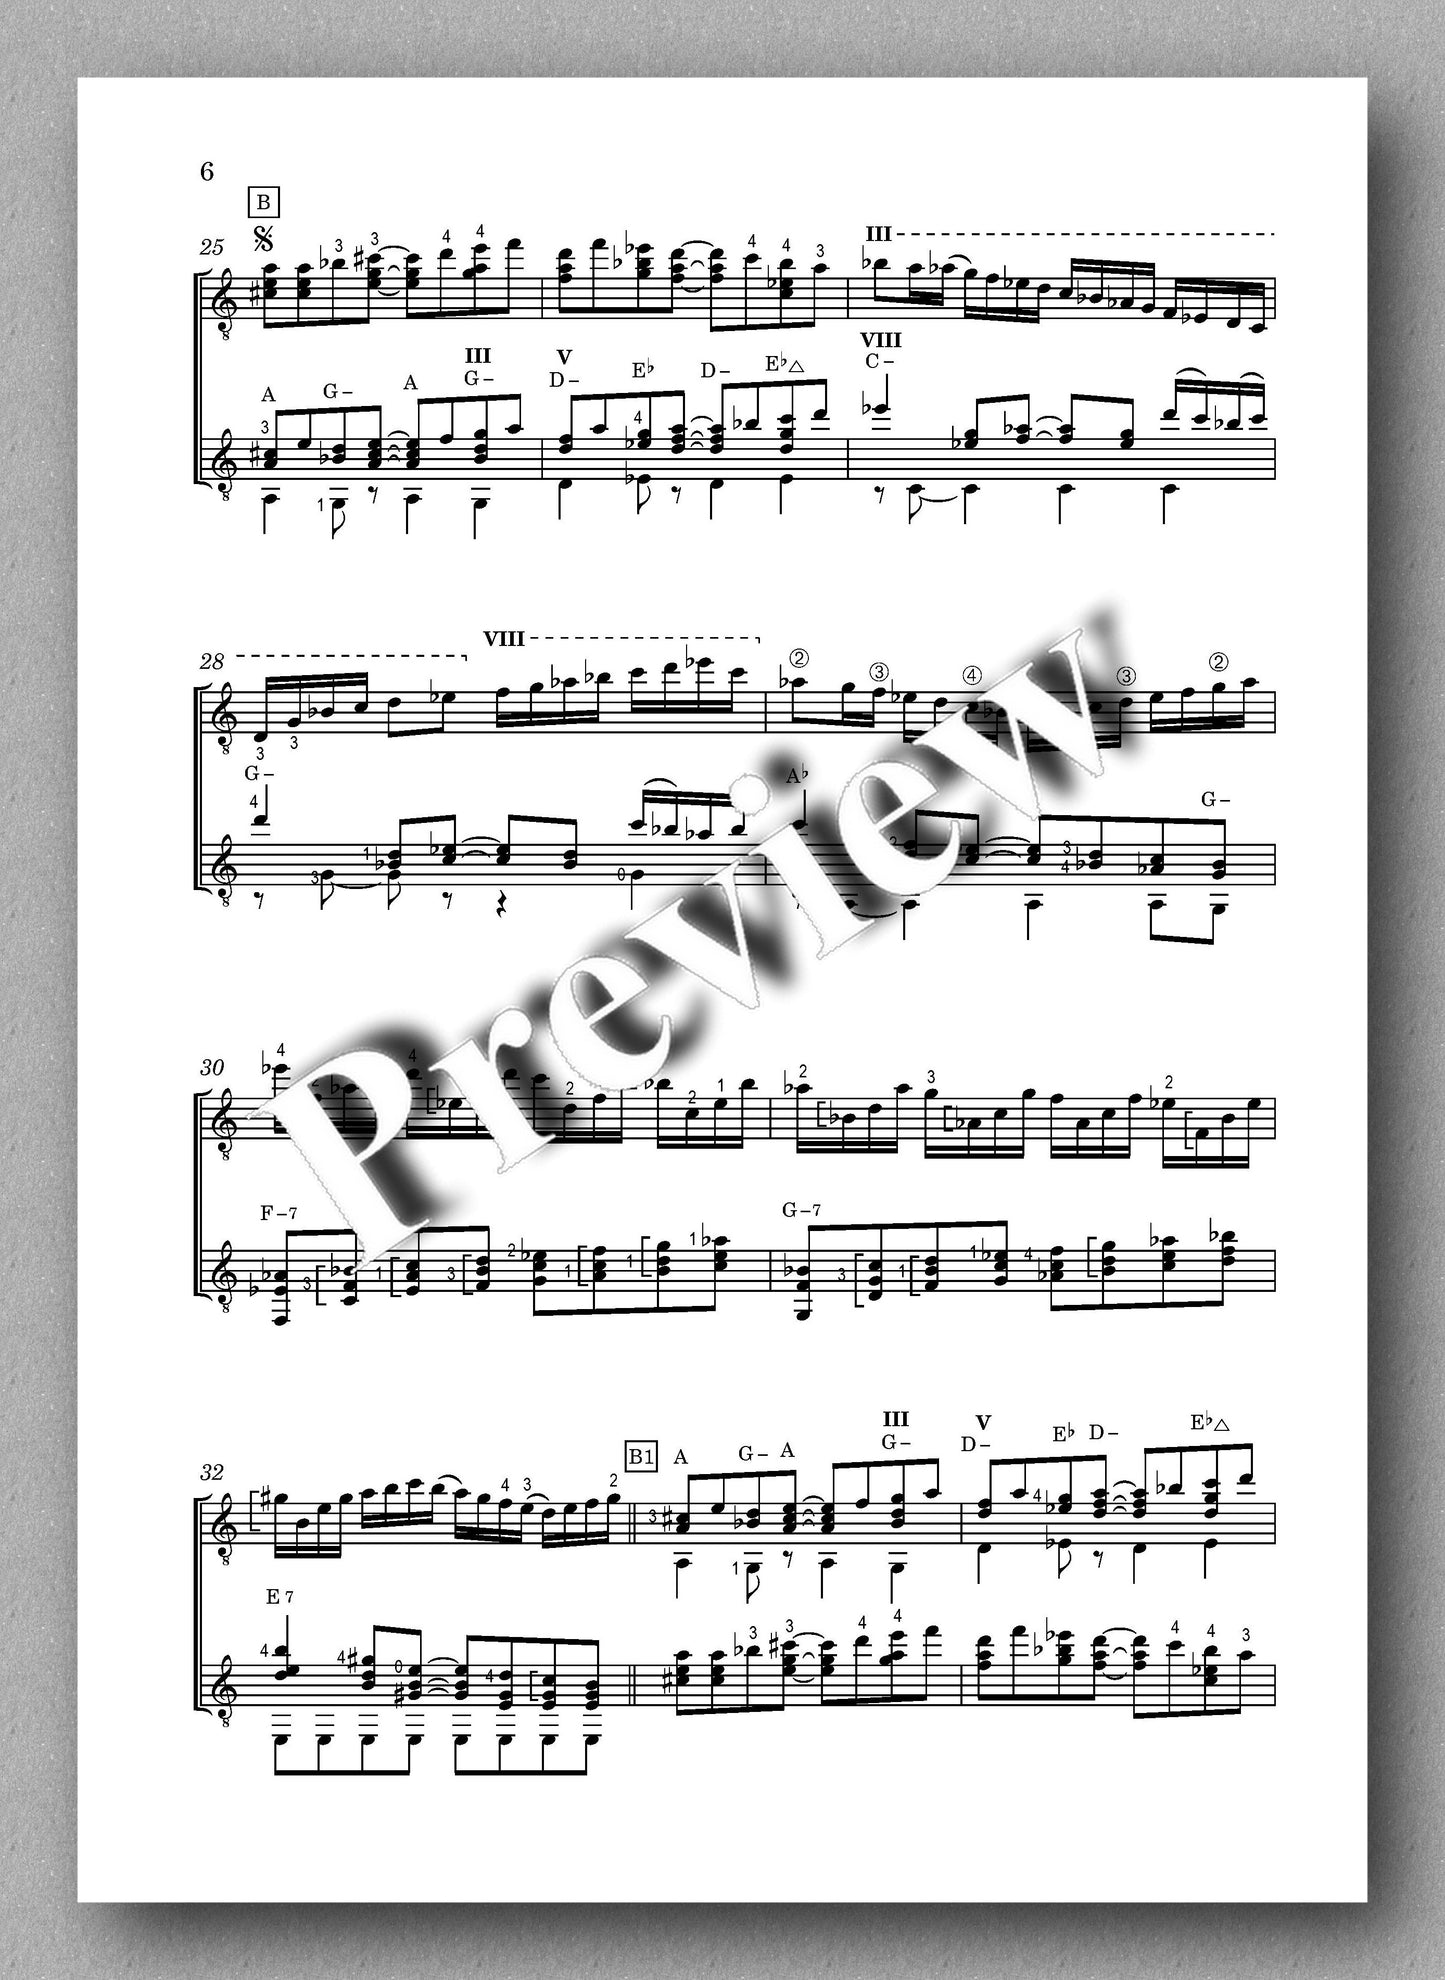 Petrov, Can't Say Goodbye - music score 3